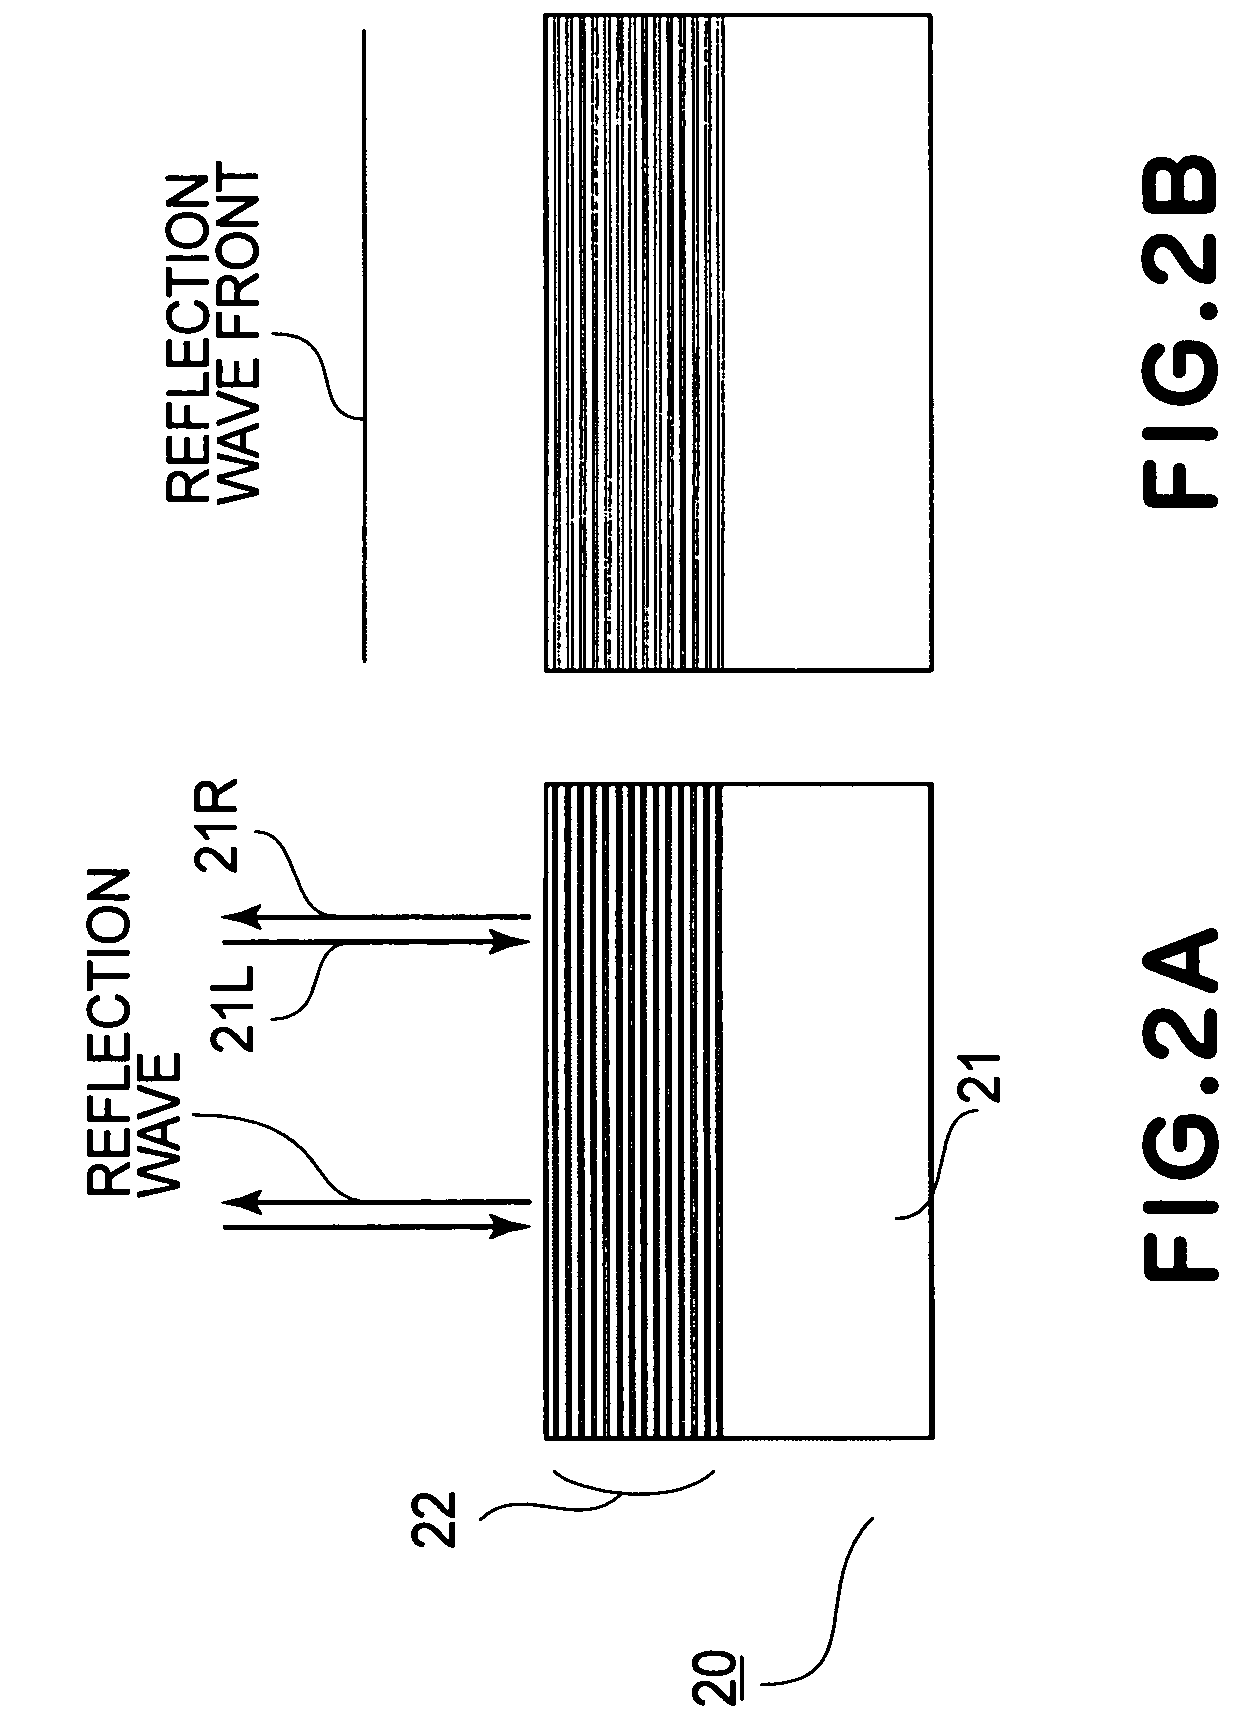 Mirror unit, method of producing the same, and exposure apparatus and method using the mirror unit